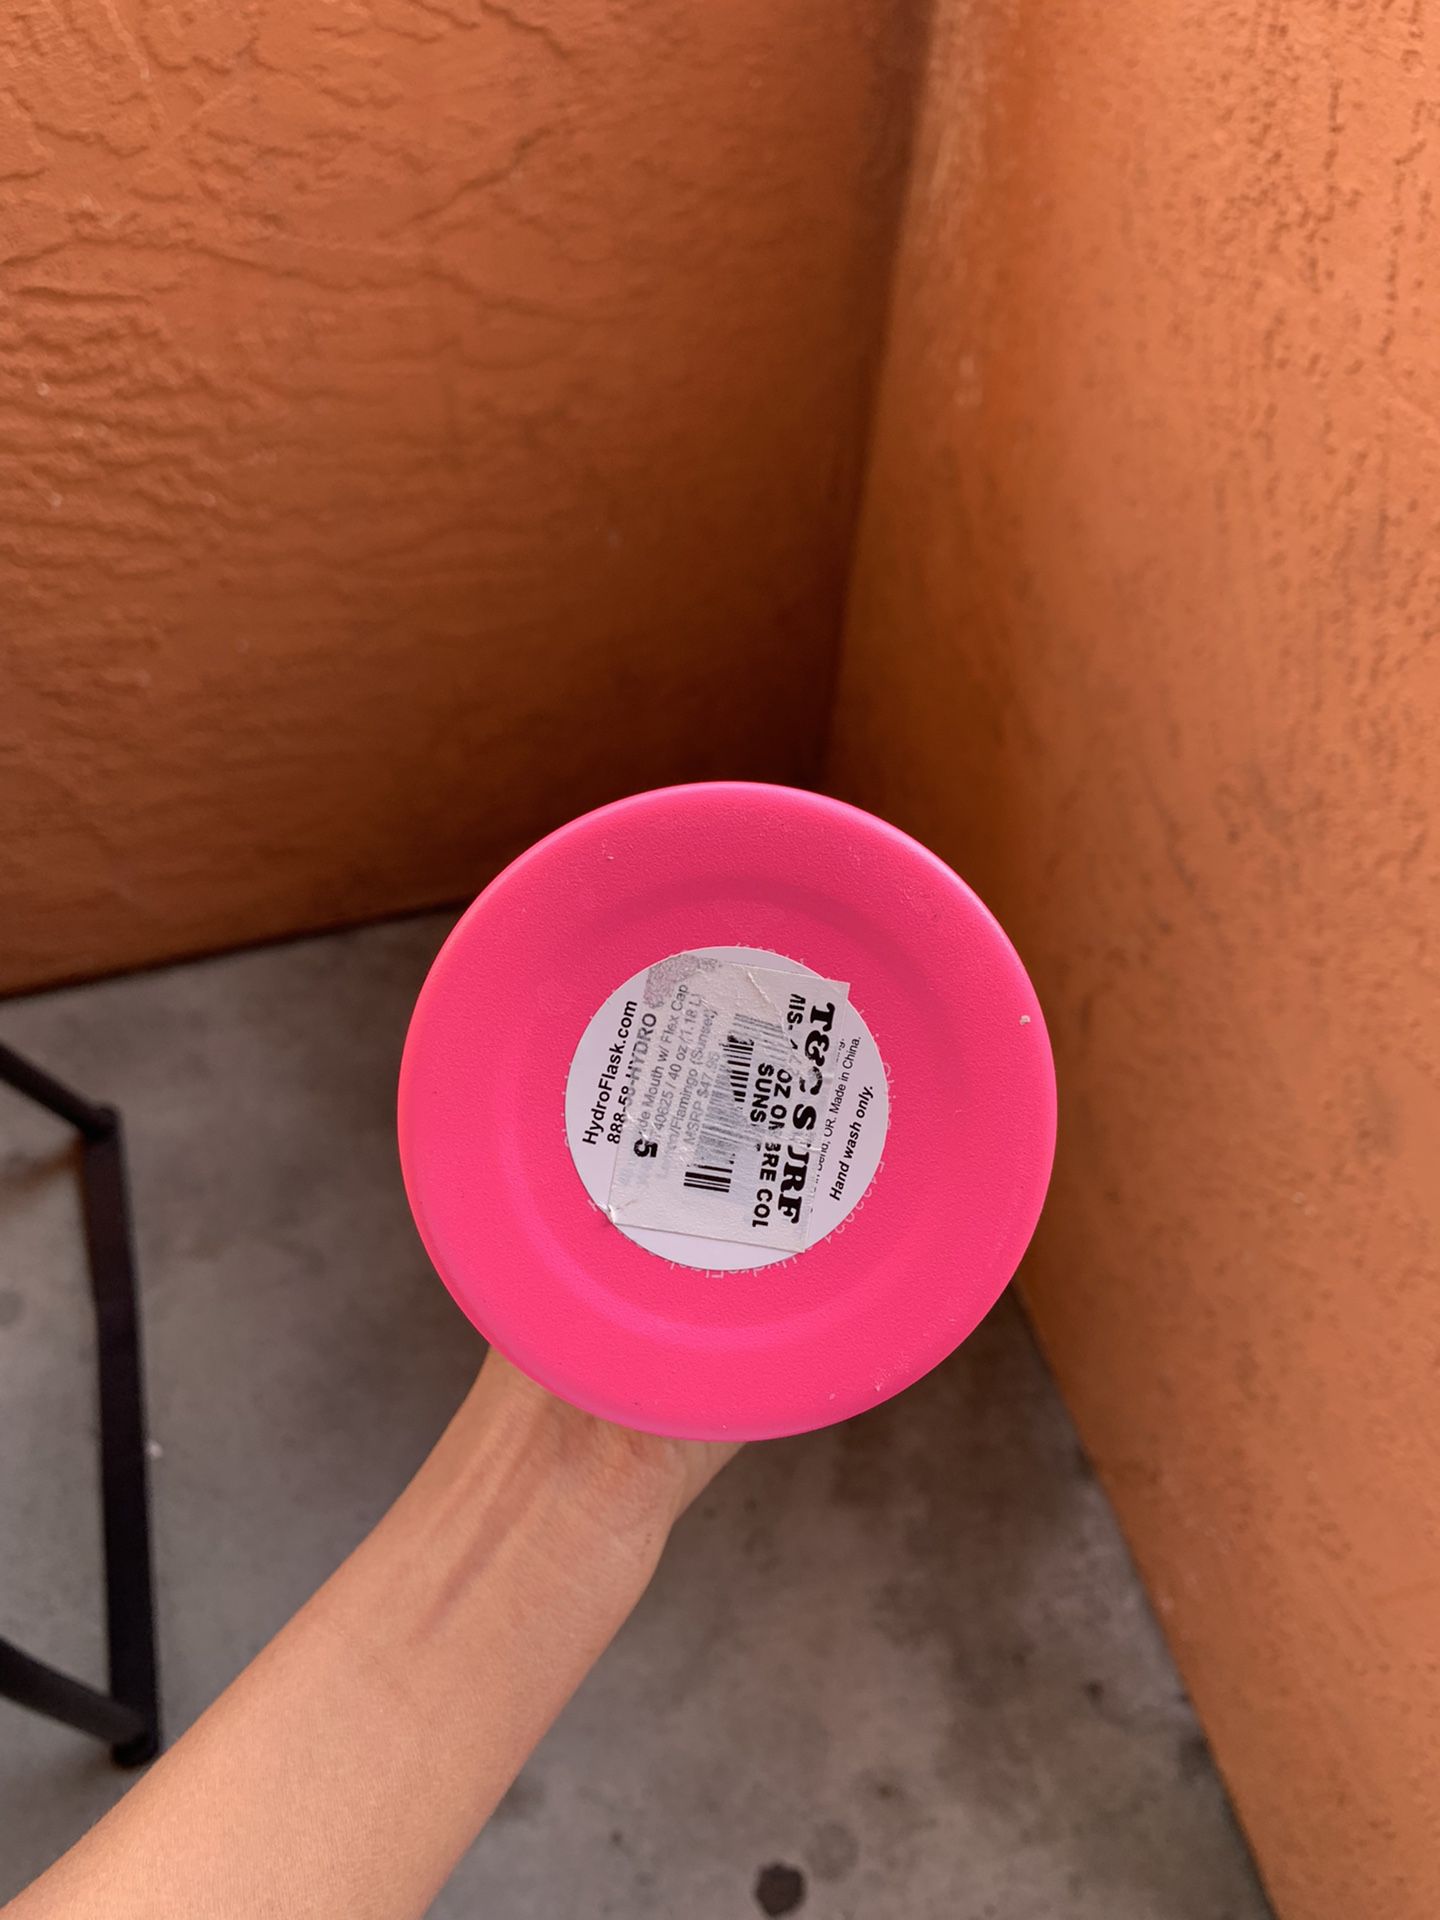 Brand New Pink 40oz Hydro flask with Straw Lid for Sale in Brea, CA -  OfferUp